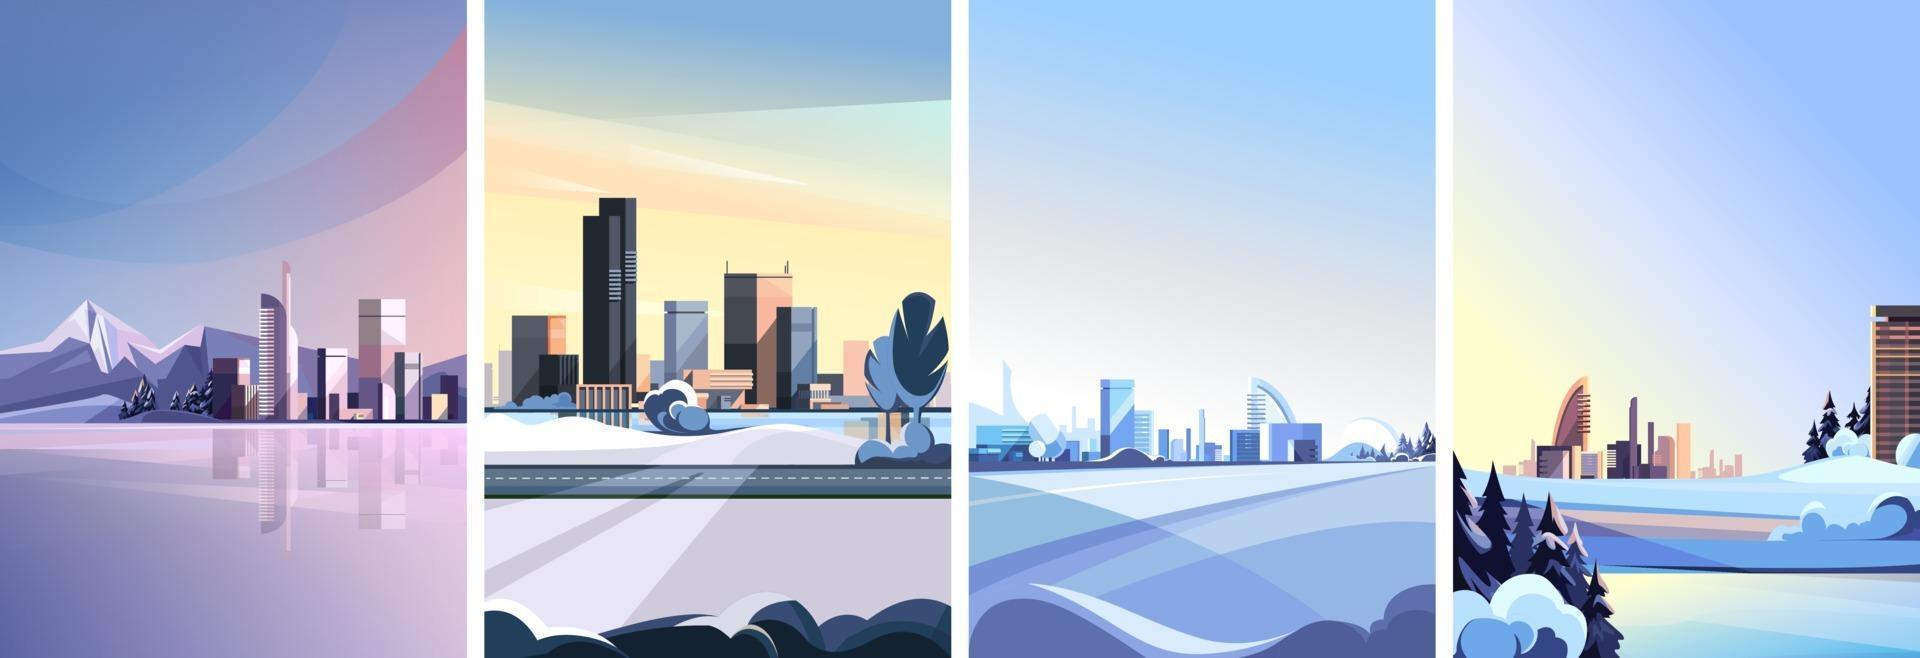 Collection of winter cityscapes vector